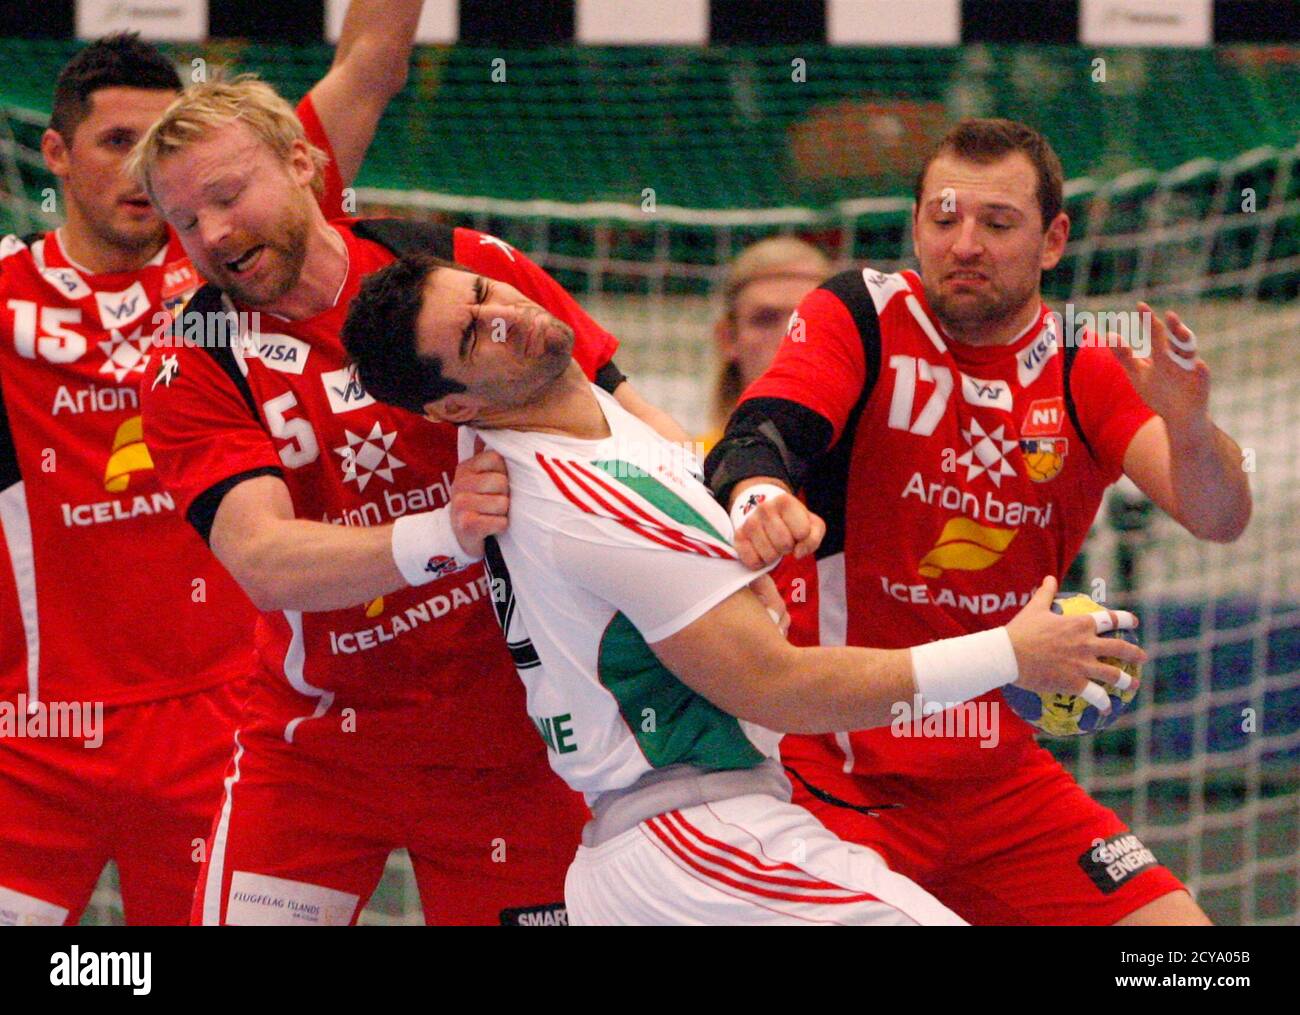 David Katzirz (C) of Hungary is challenged by Ingimundur Ingimundarson (L)  and Sverre Jakobsson of Iceland during their Group B match at the Men's  Handball World Championship in Norrkoping January 14, 2011.